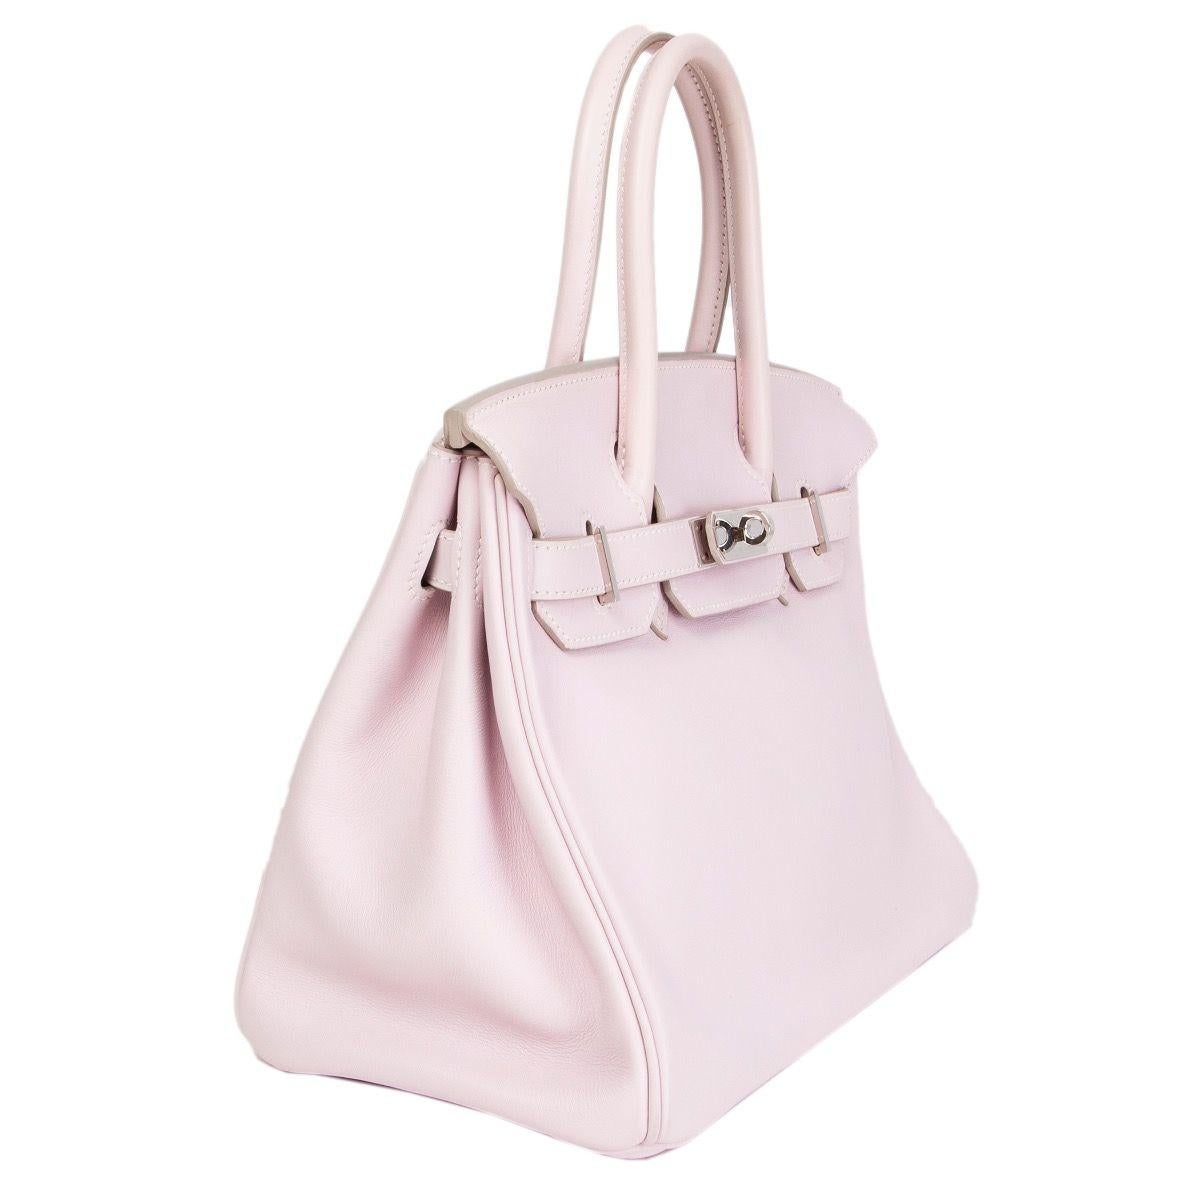 Hermes 'Birkin 30' in Rose Dragee (pale pink) Veau Swift leather. Lined with an open pocket against the front and a zipper pocket against the back. Has been carried a very faint rub mark from the lock, and very slight yellowing to the handles.